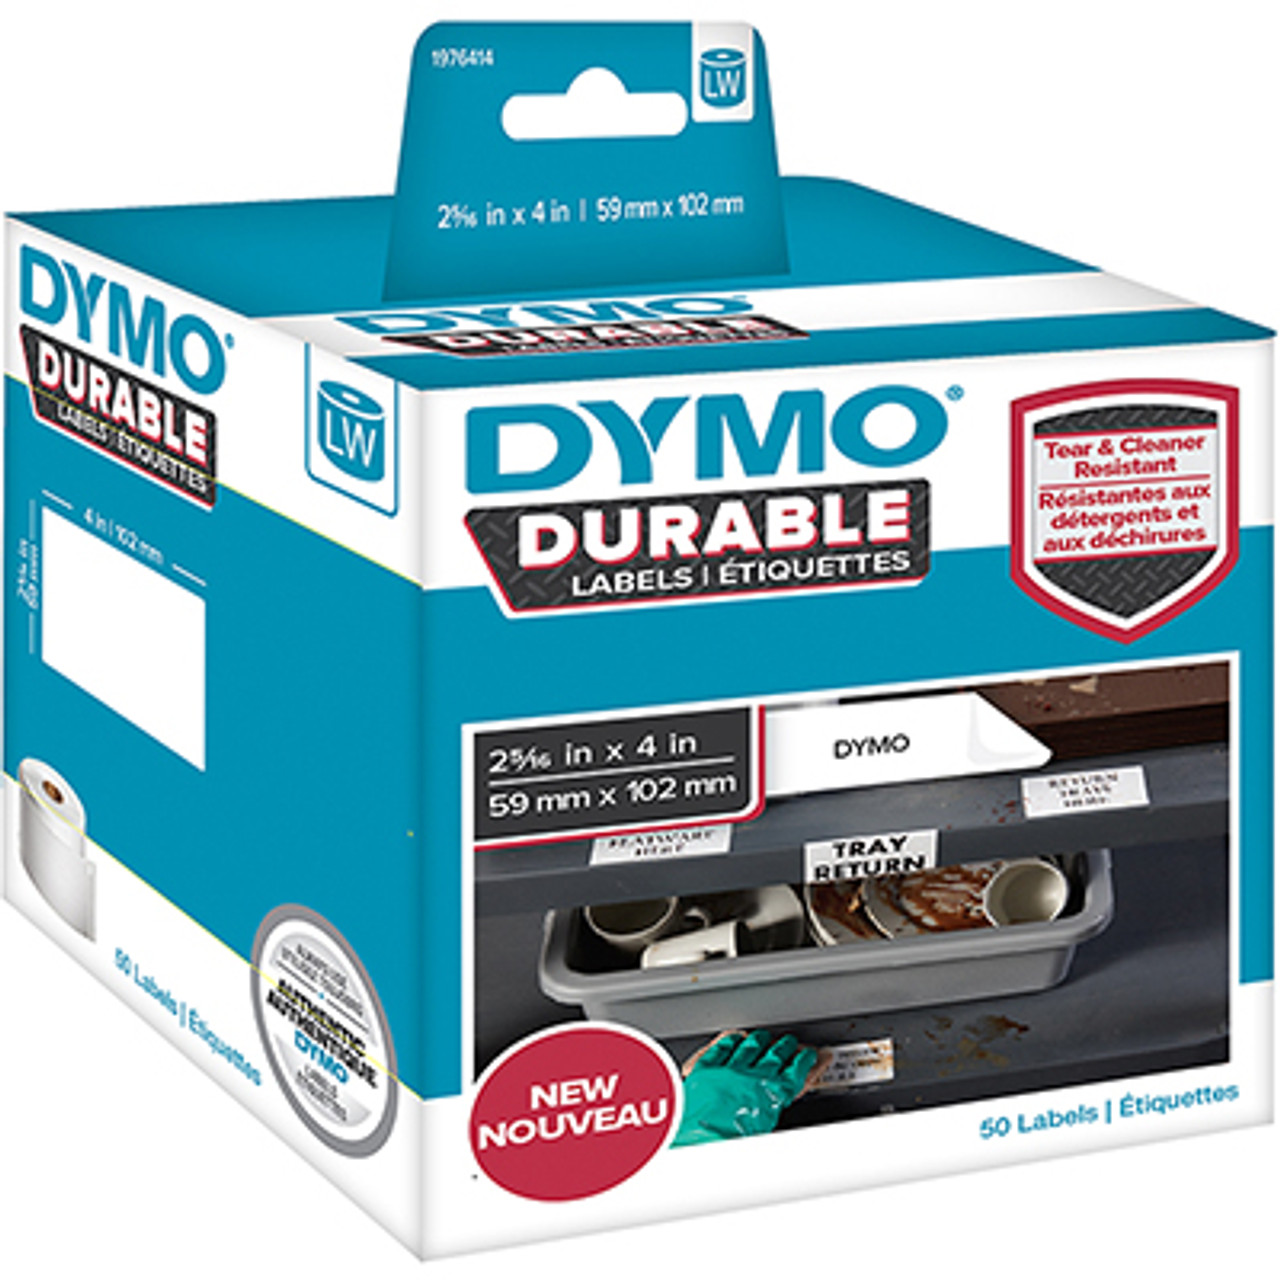 Dymo LW Shipping Labels - White